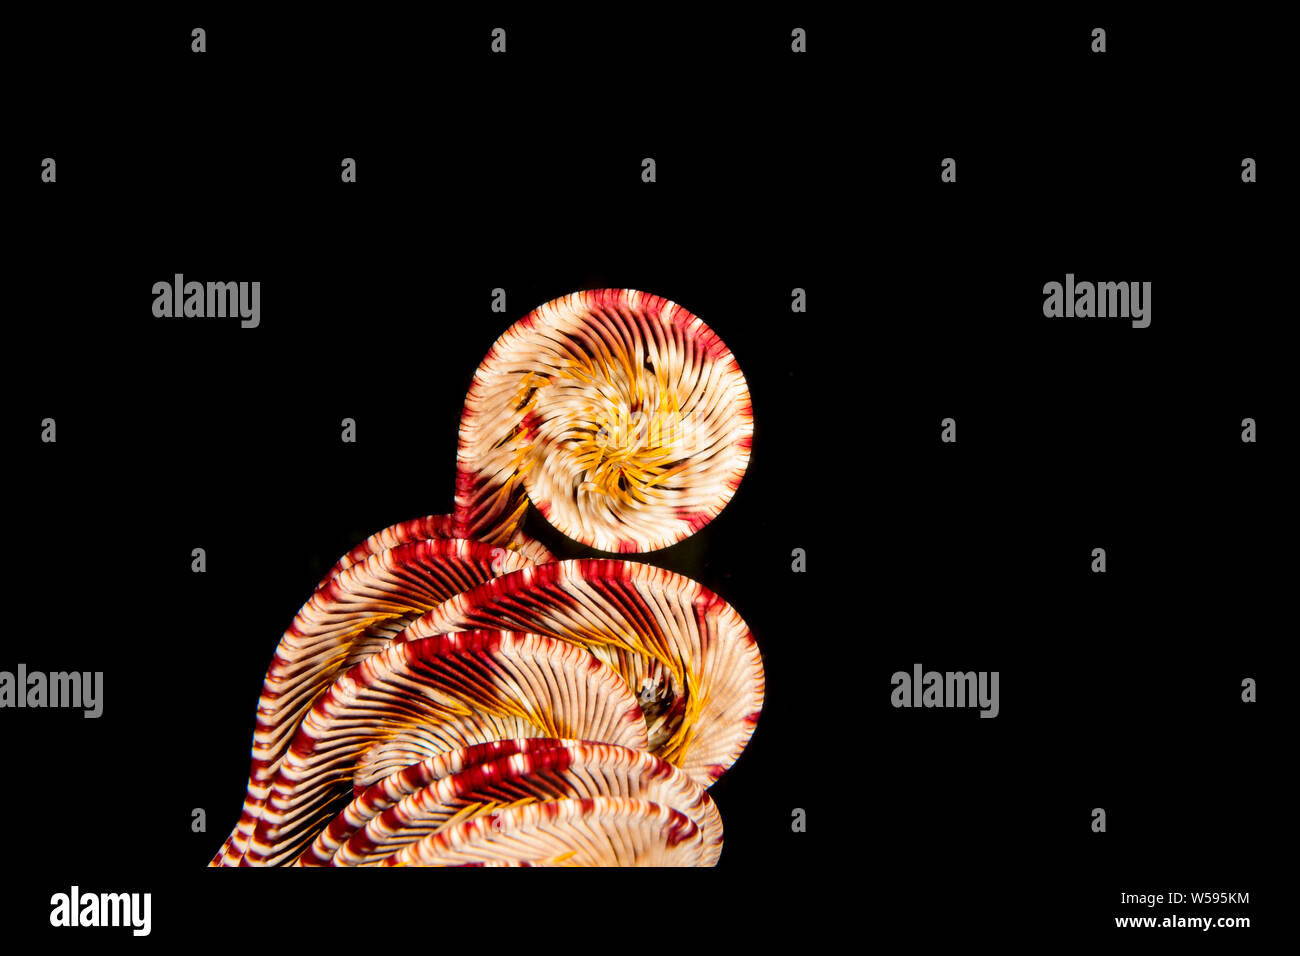 crinoid or feather star with arms curled up at night, Dumaguete, Negros Oriental, Philippines, Bohol Sea ( Western Pacific Ocean ) Stock Photo